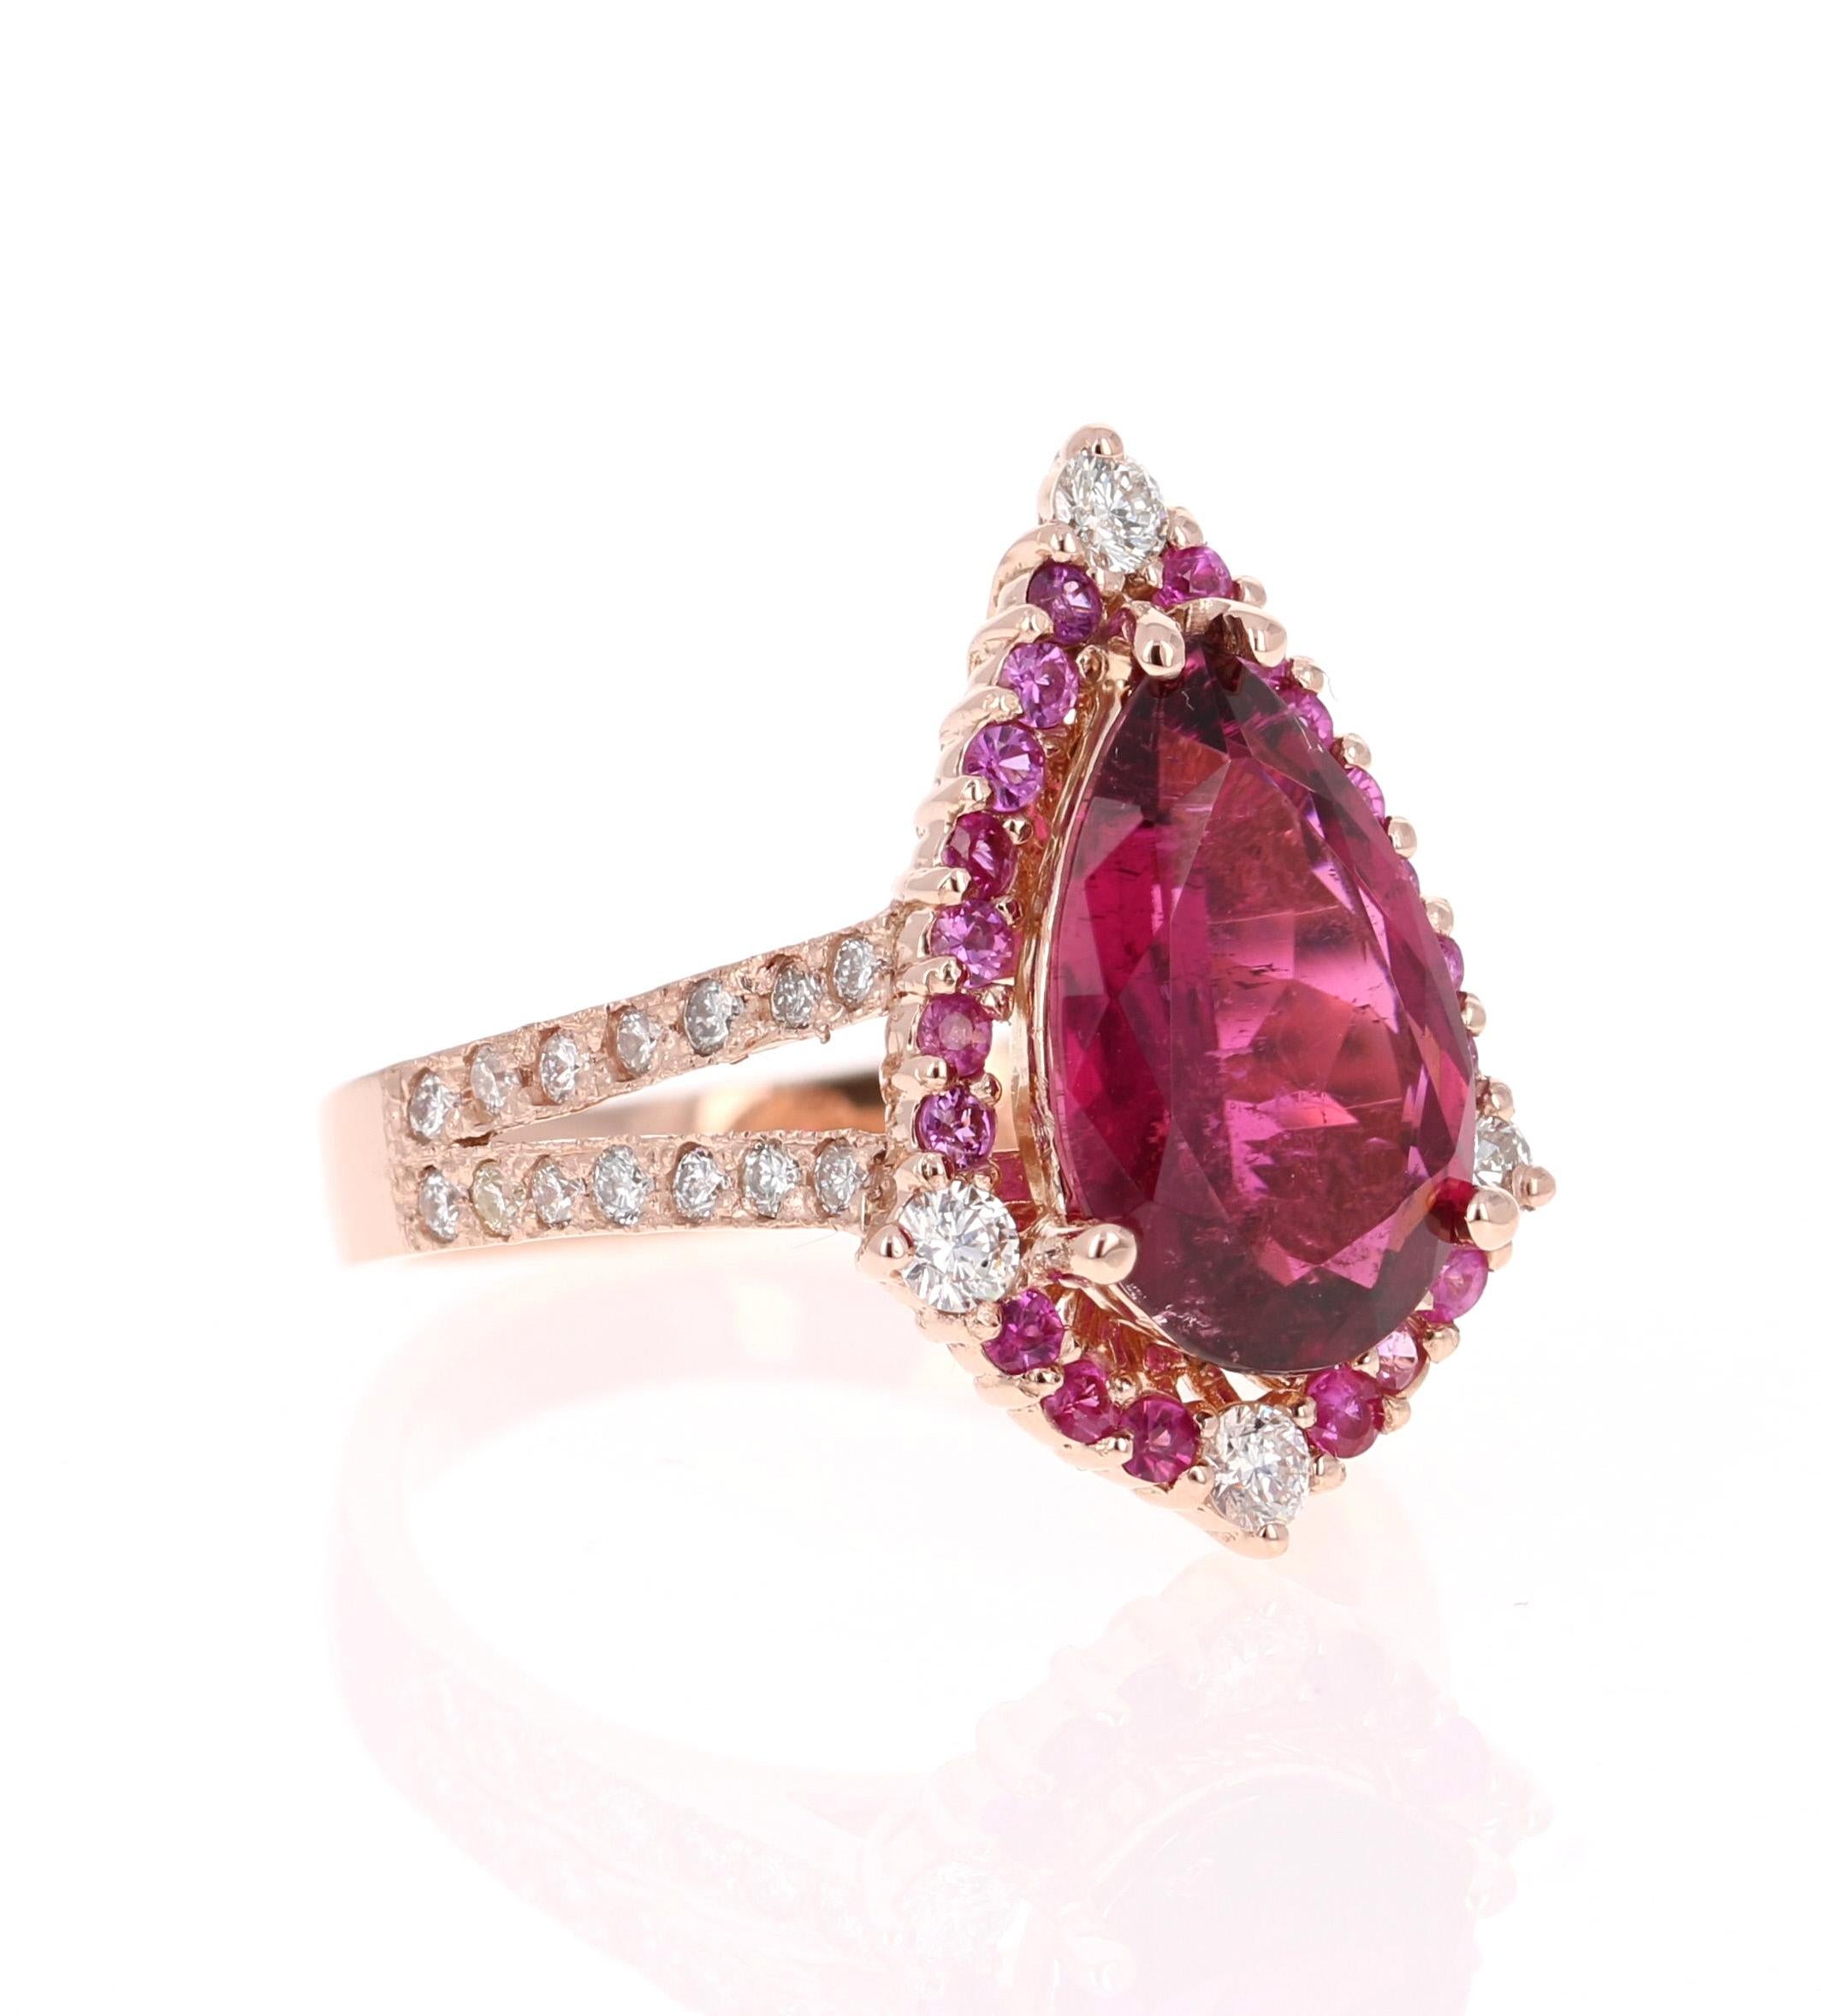 Stunning and uniquely designed 4.06 Carat Pink Tourmaline, Pink Sapphire Diamond Rose Gold Cocktail Ring! 

This ring has a beautiful and bold 3.19 Carat Pear Cut Tourmaline that measures at 8 mm x 12 mm (width x length) and is surrounded by 20 Pink